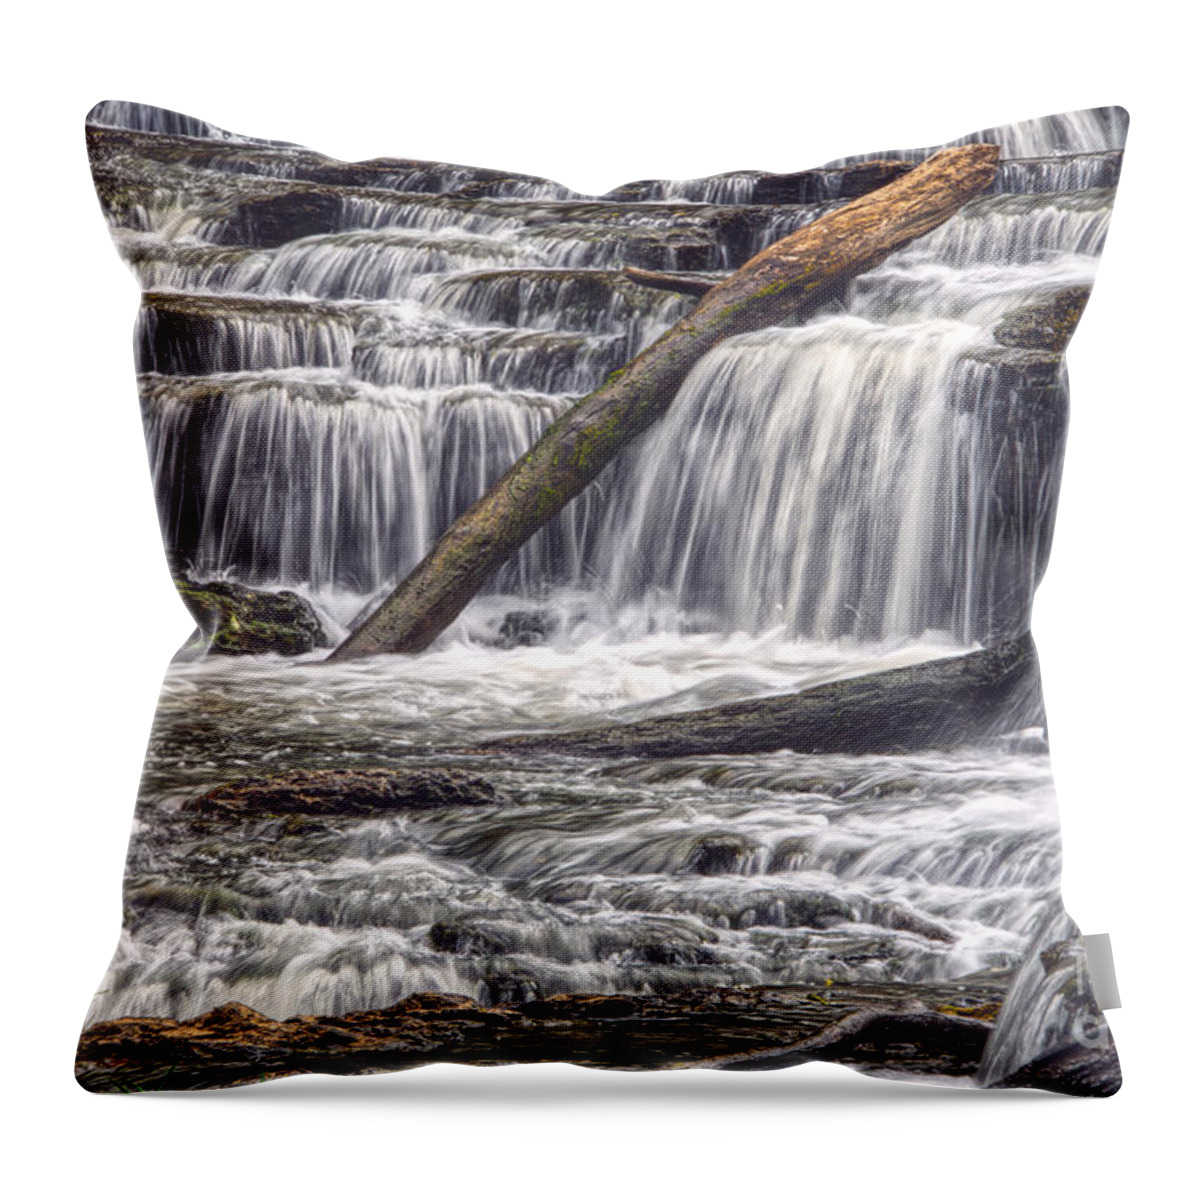 Burgess Falls State Park Throw Pillow featuring the photograph Burgess Falls 5 by Phil Perkins